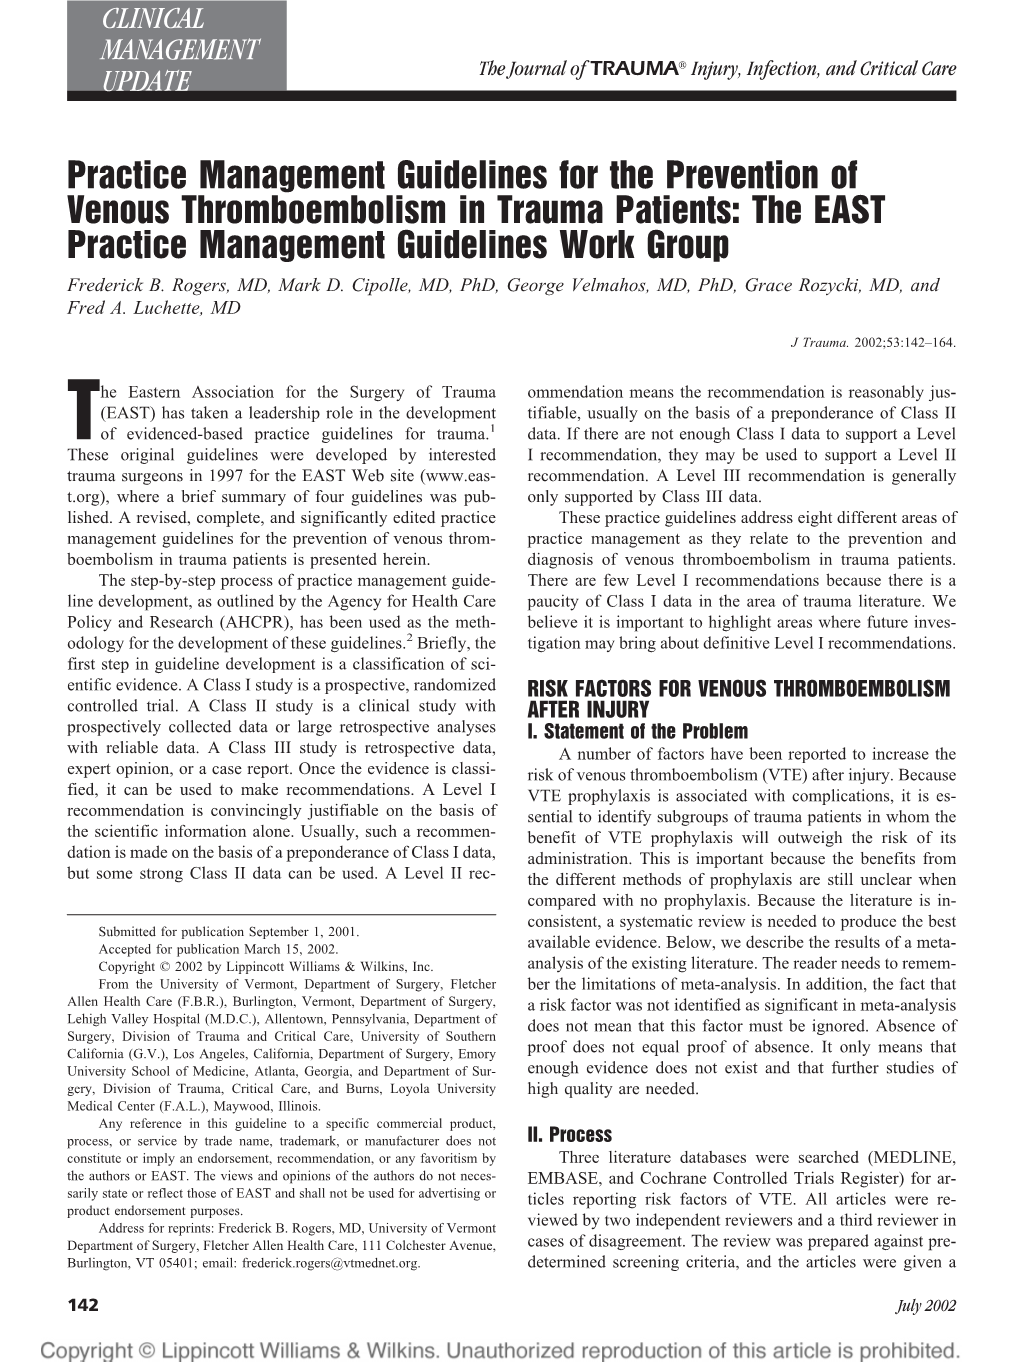 Practice Management Guidelines for the Prevention of Venous Thromboembolism in Trauma Patients: the EAST Practice Management Guidelines Work Group Frederick B